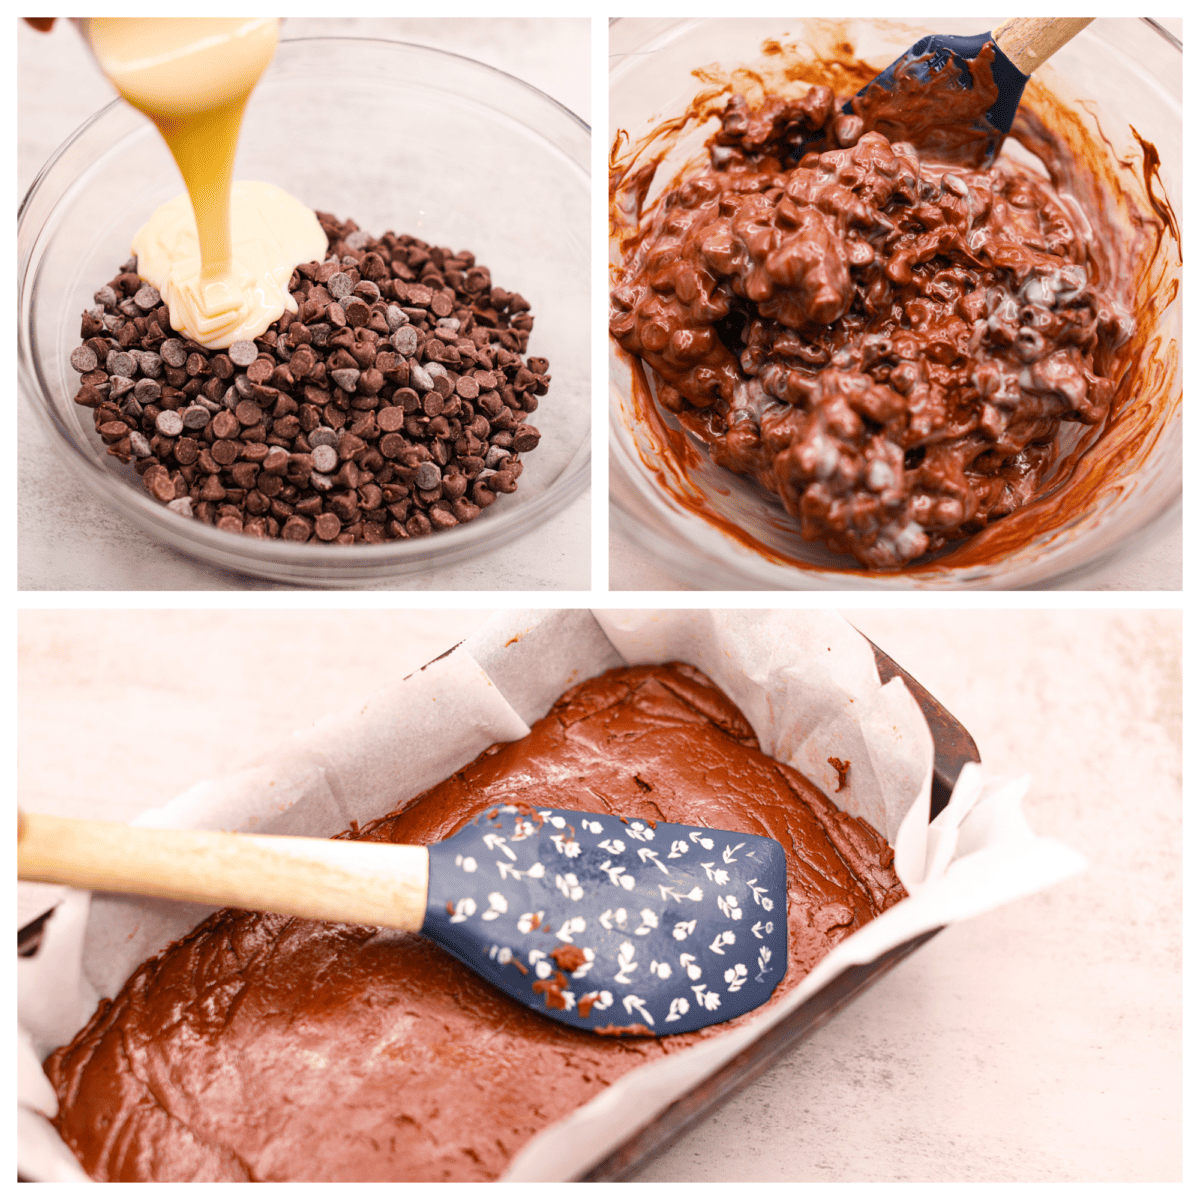 First photo of chocolate chips and sweetened condensed milk added to a bowl. Second photo of stiring the melted chocolate and condensed milk. Third photo of pressing the fudge into a pan.